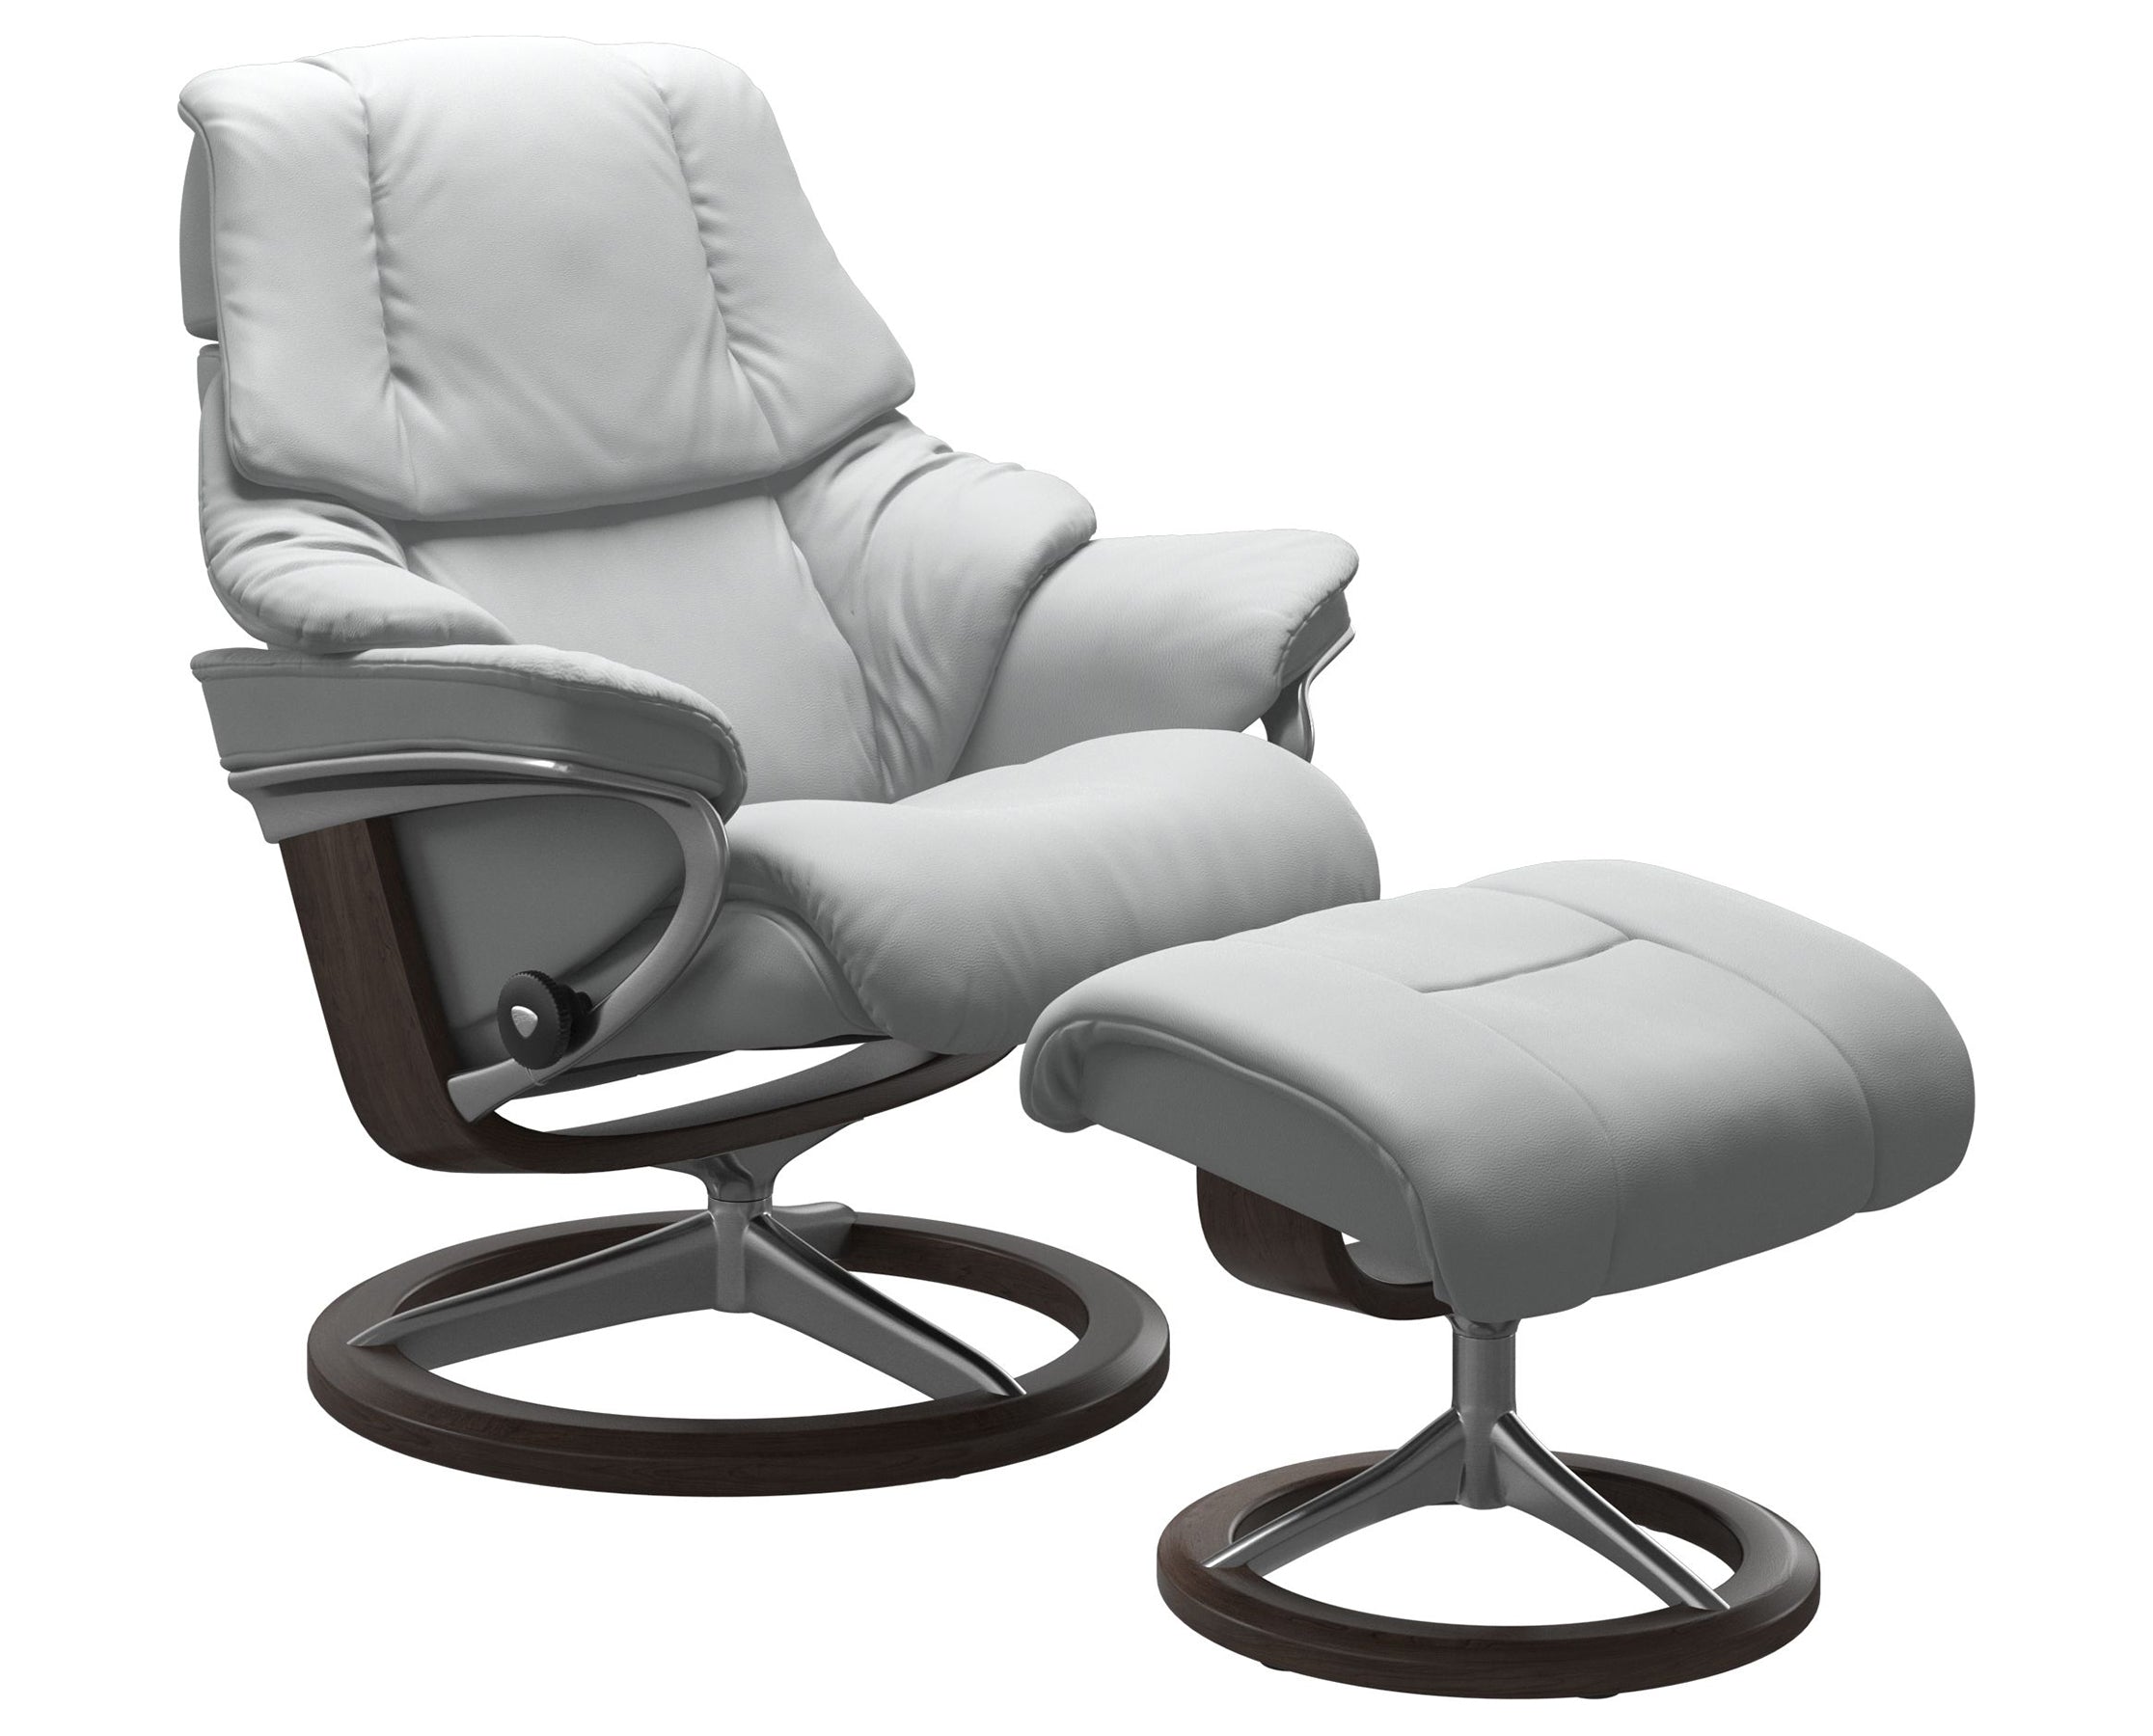 Paloma Leather Misty Grey S/M/L and Wenge Base | Stressless Reno Signature Recliner | Valley Ridge Furniture